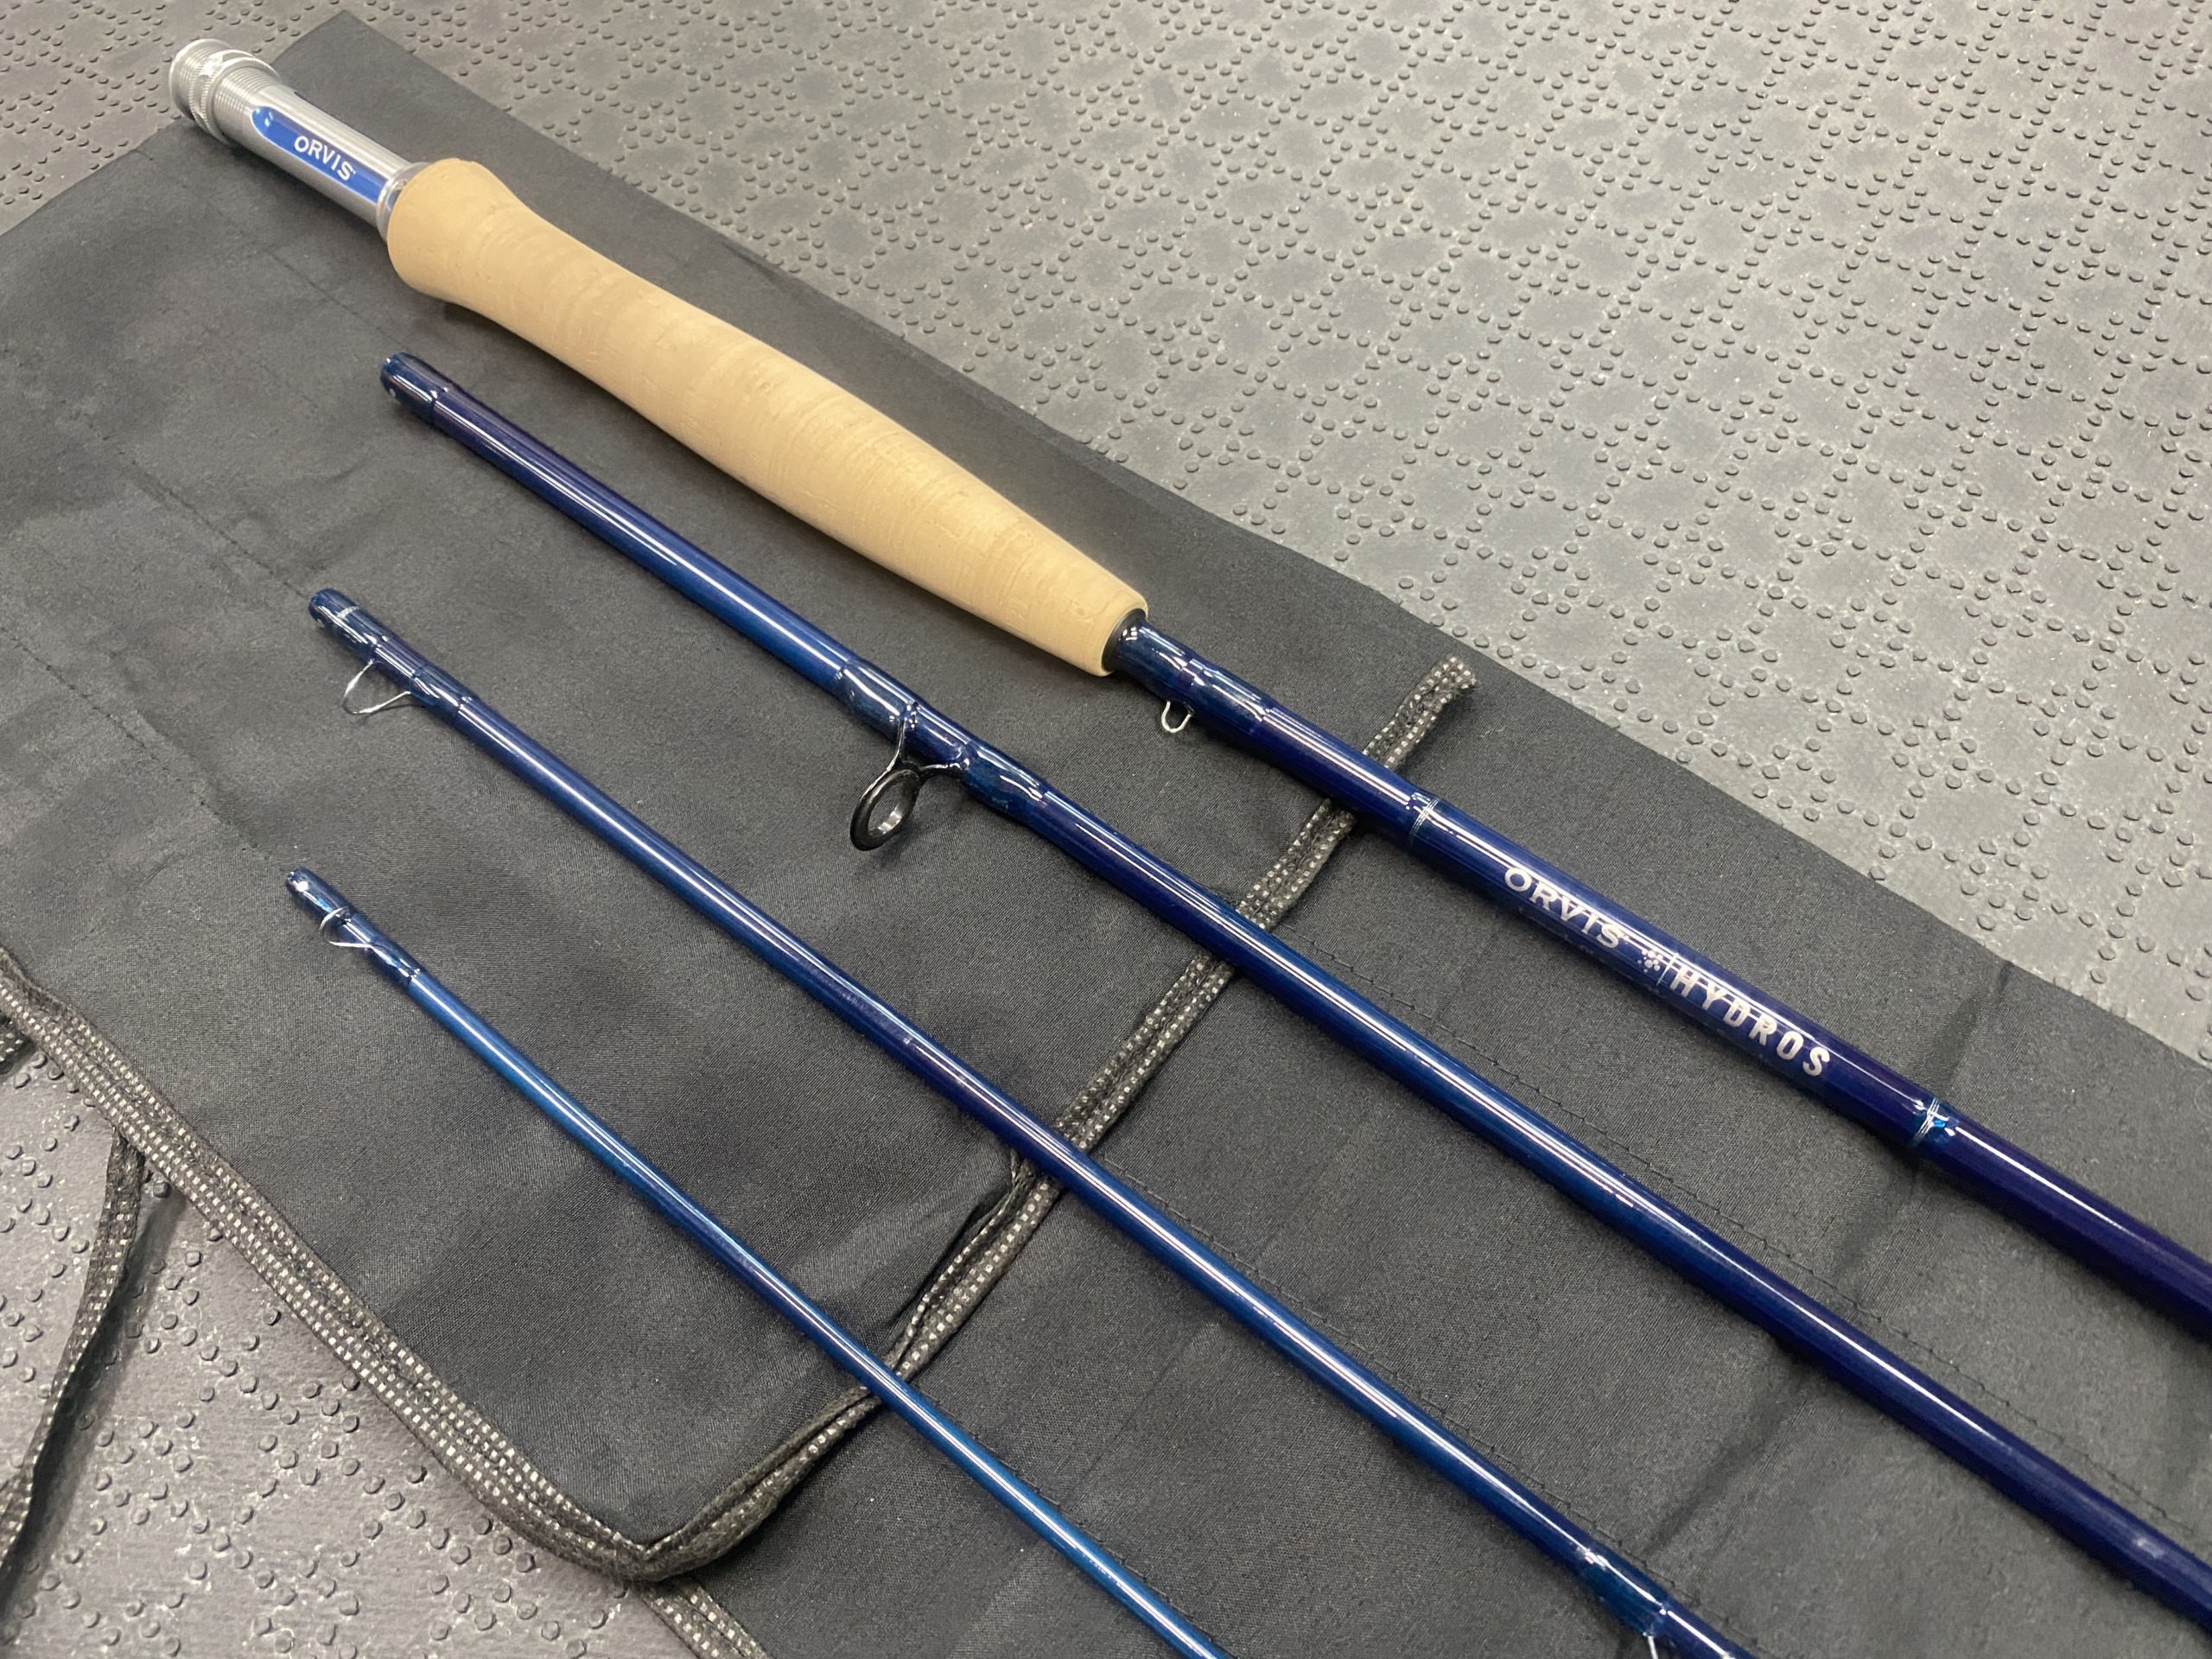 https://thefirstcast.ca/wp-content/uploads/2021/08/Orvis-Hydros-Tip-Flex-9-Foot-4-Piece-5-Weight-Fly-Rod-D-scaled.jpg